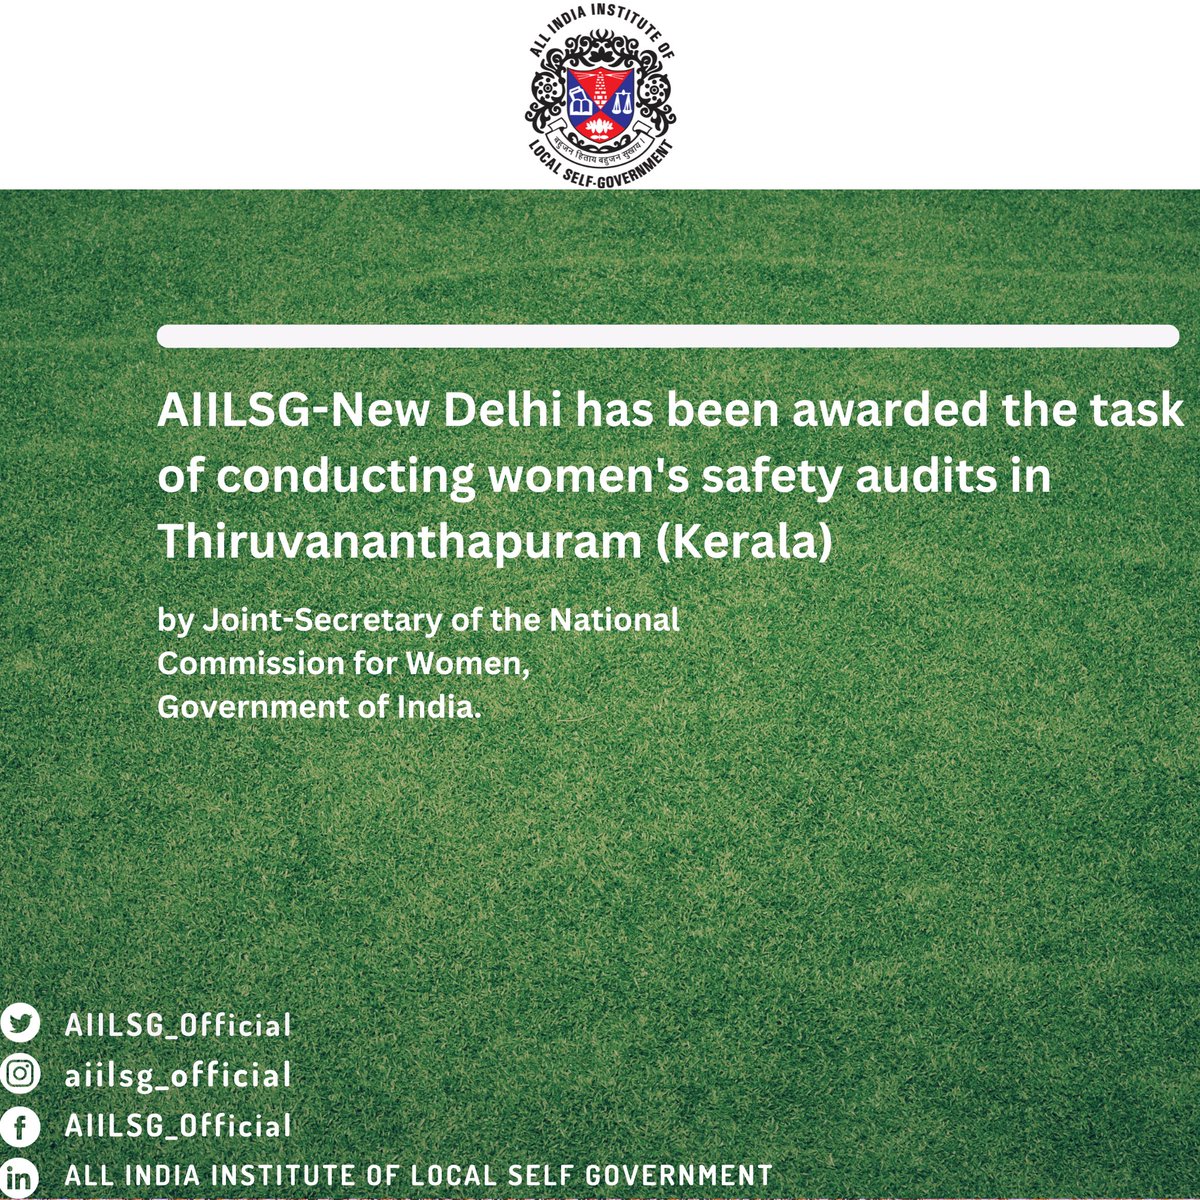 AIILSG-New Delhi has been awarded the task of conducting women's safety audits in Thiruvananthapuram (#Kerala ) by Joint Secretary of the National Commission for Women, Government of India.   

#womenssafety #SafeIndia #SafetyForAll #EmpowerWomen #NewDelhi #Thiruvananthapuram